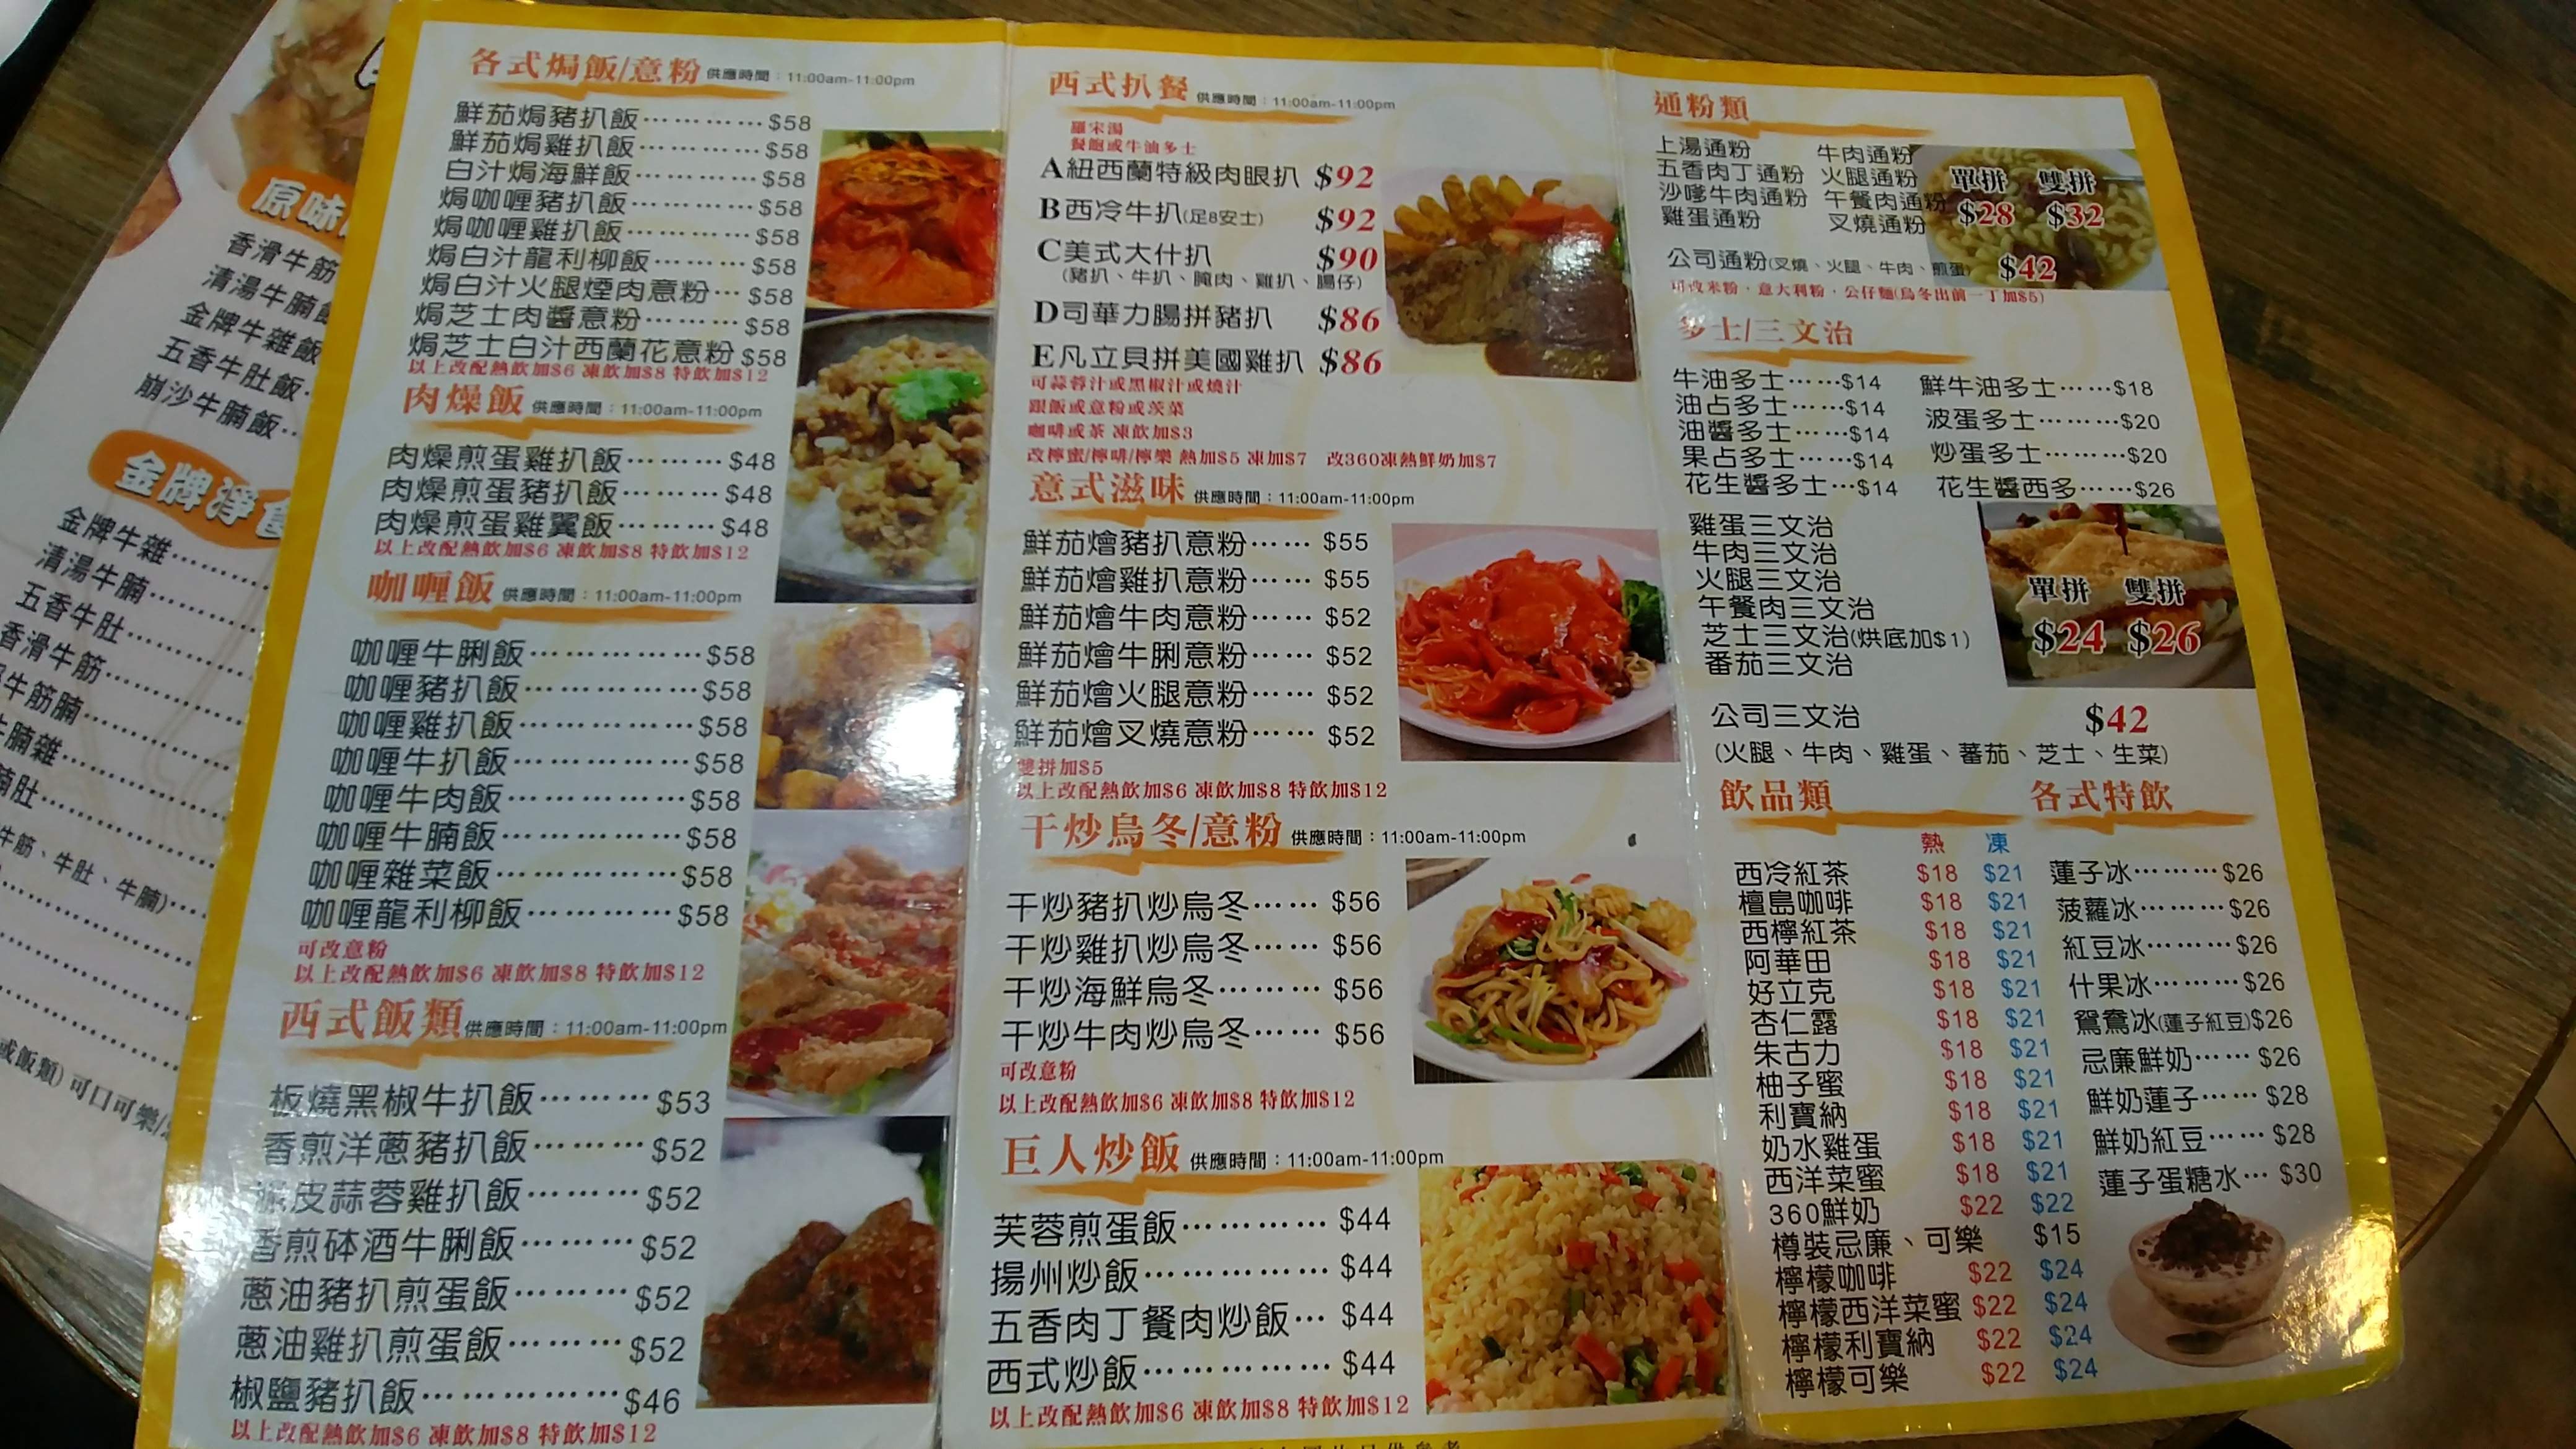 Too many dishes from menu in Cha Chaan Teng